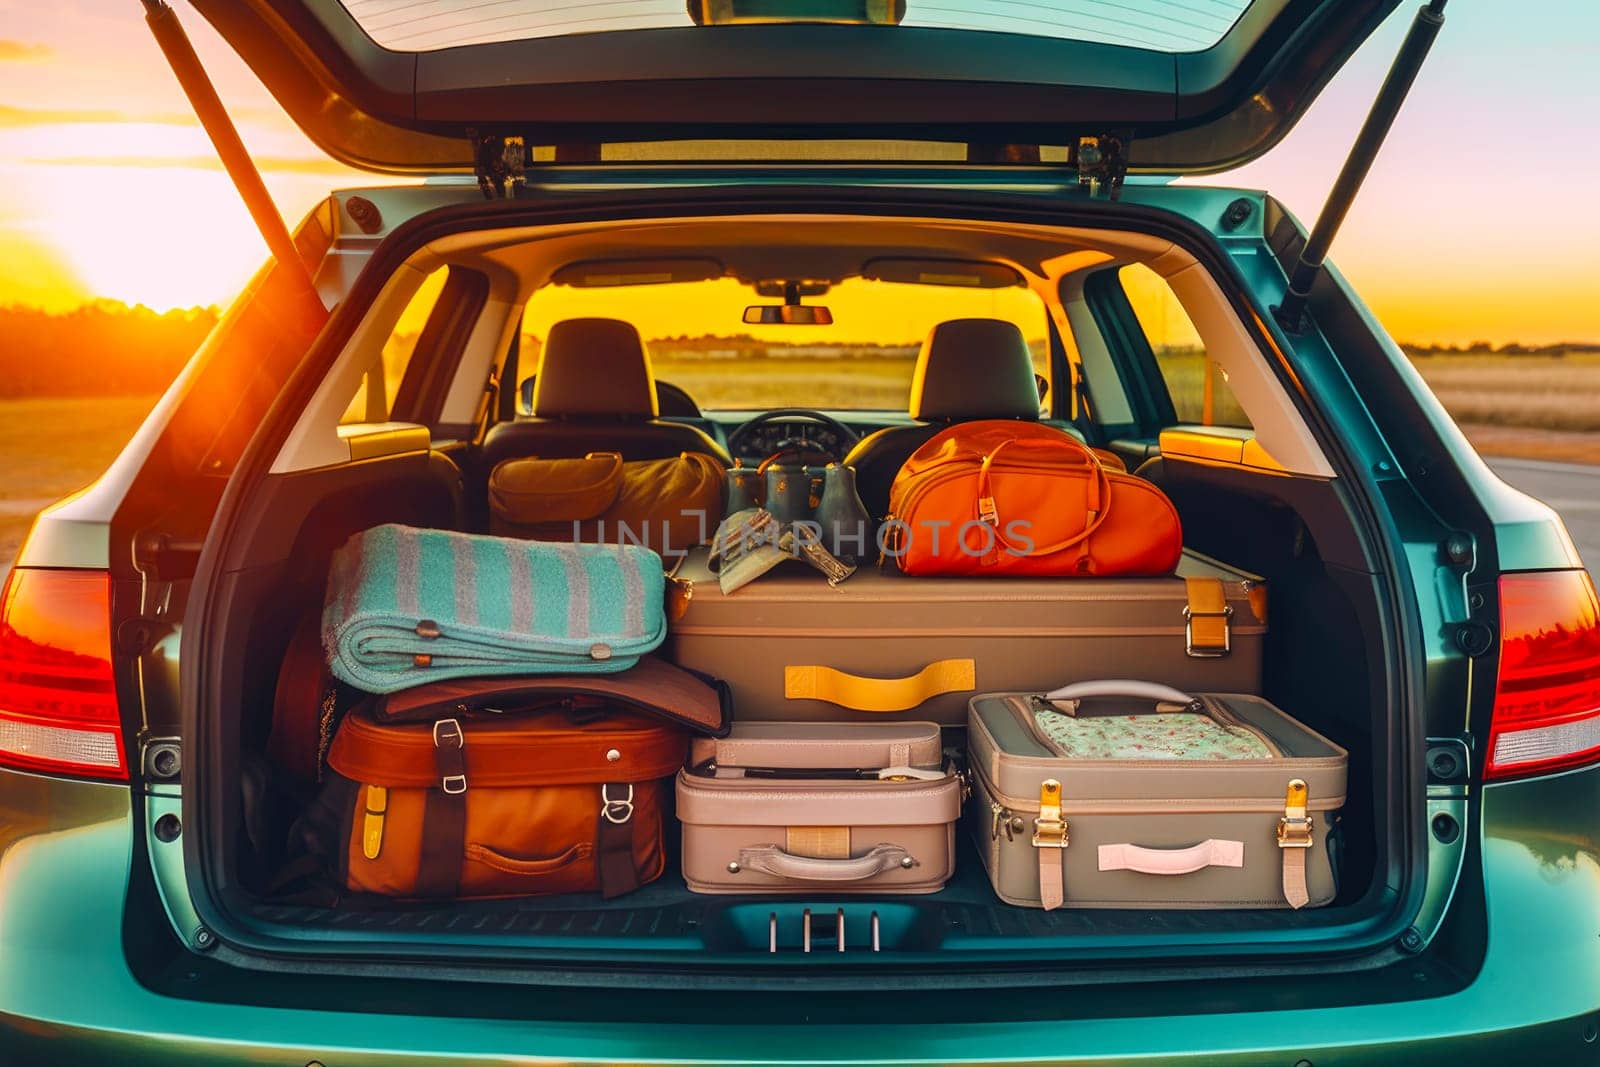 Retro car with luggage in trunk at sunset. Suitcases and bags in trunk of car ready to depart for holidays. Travel, vacation concept